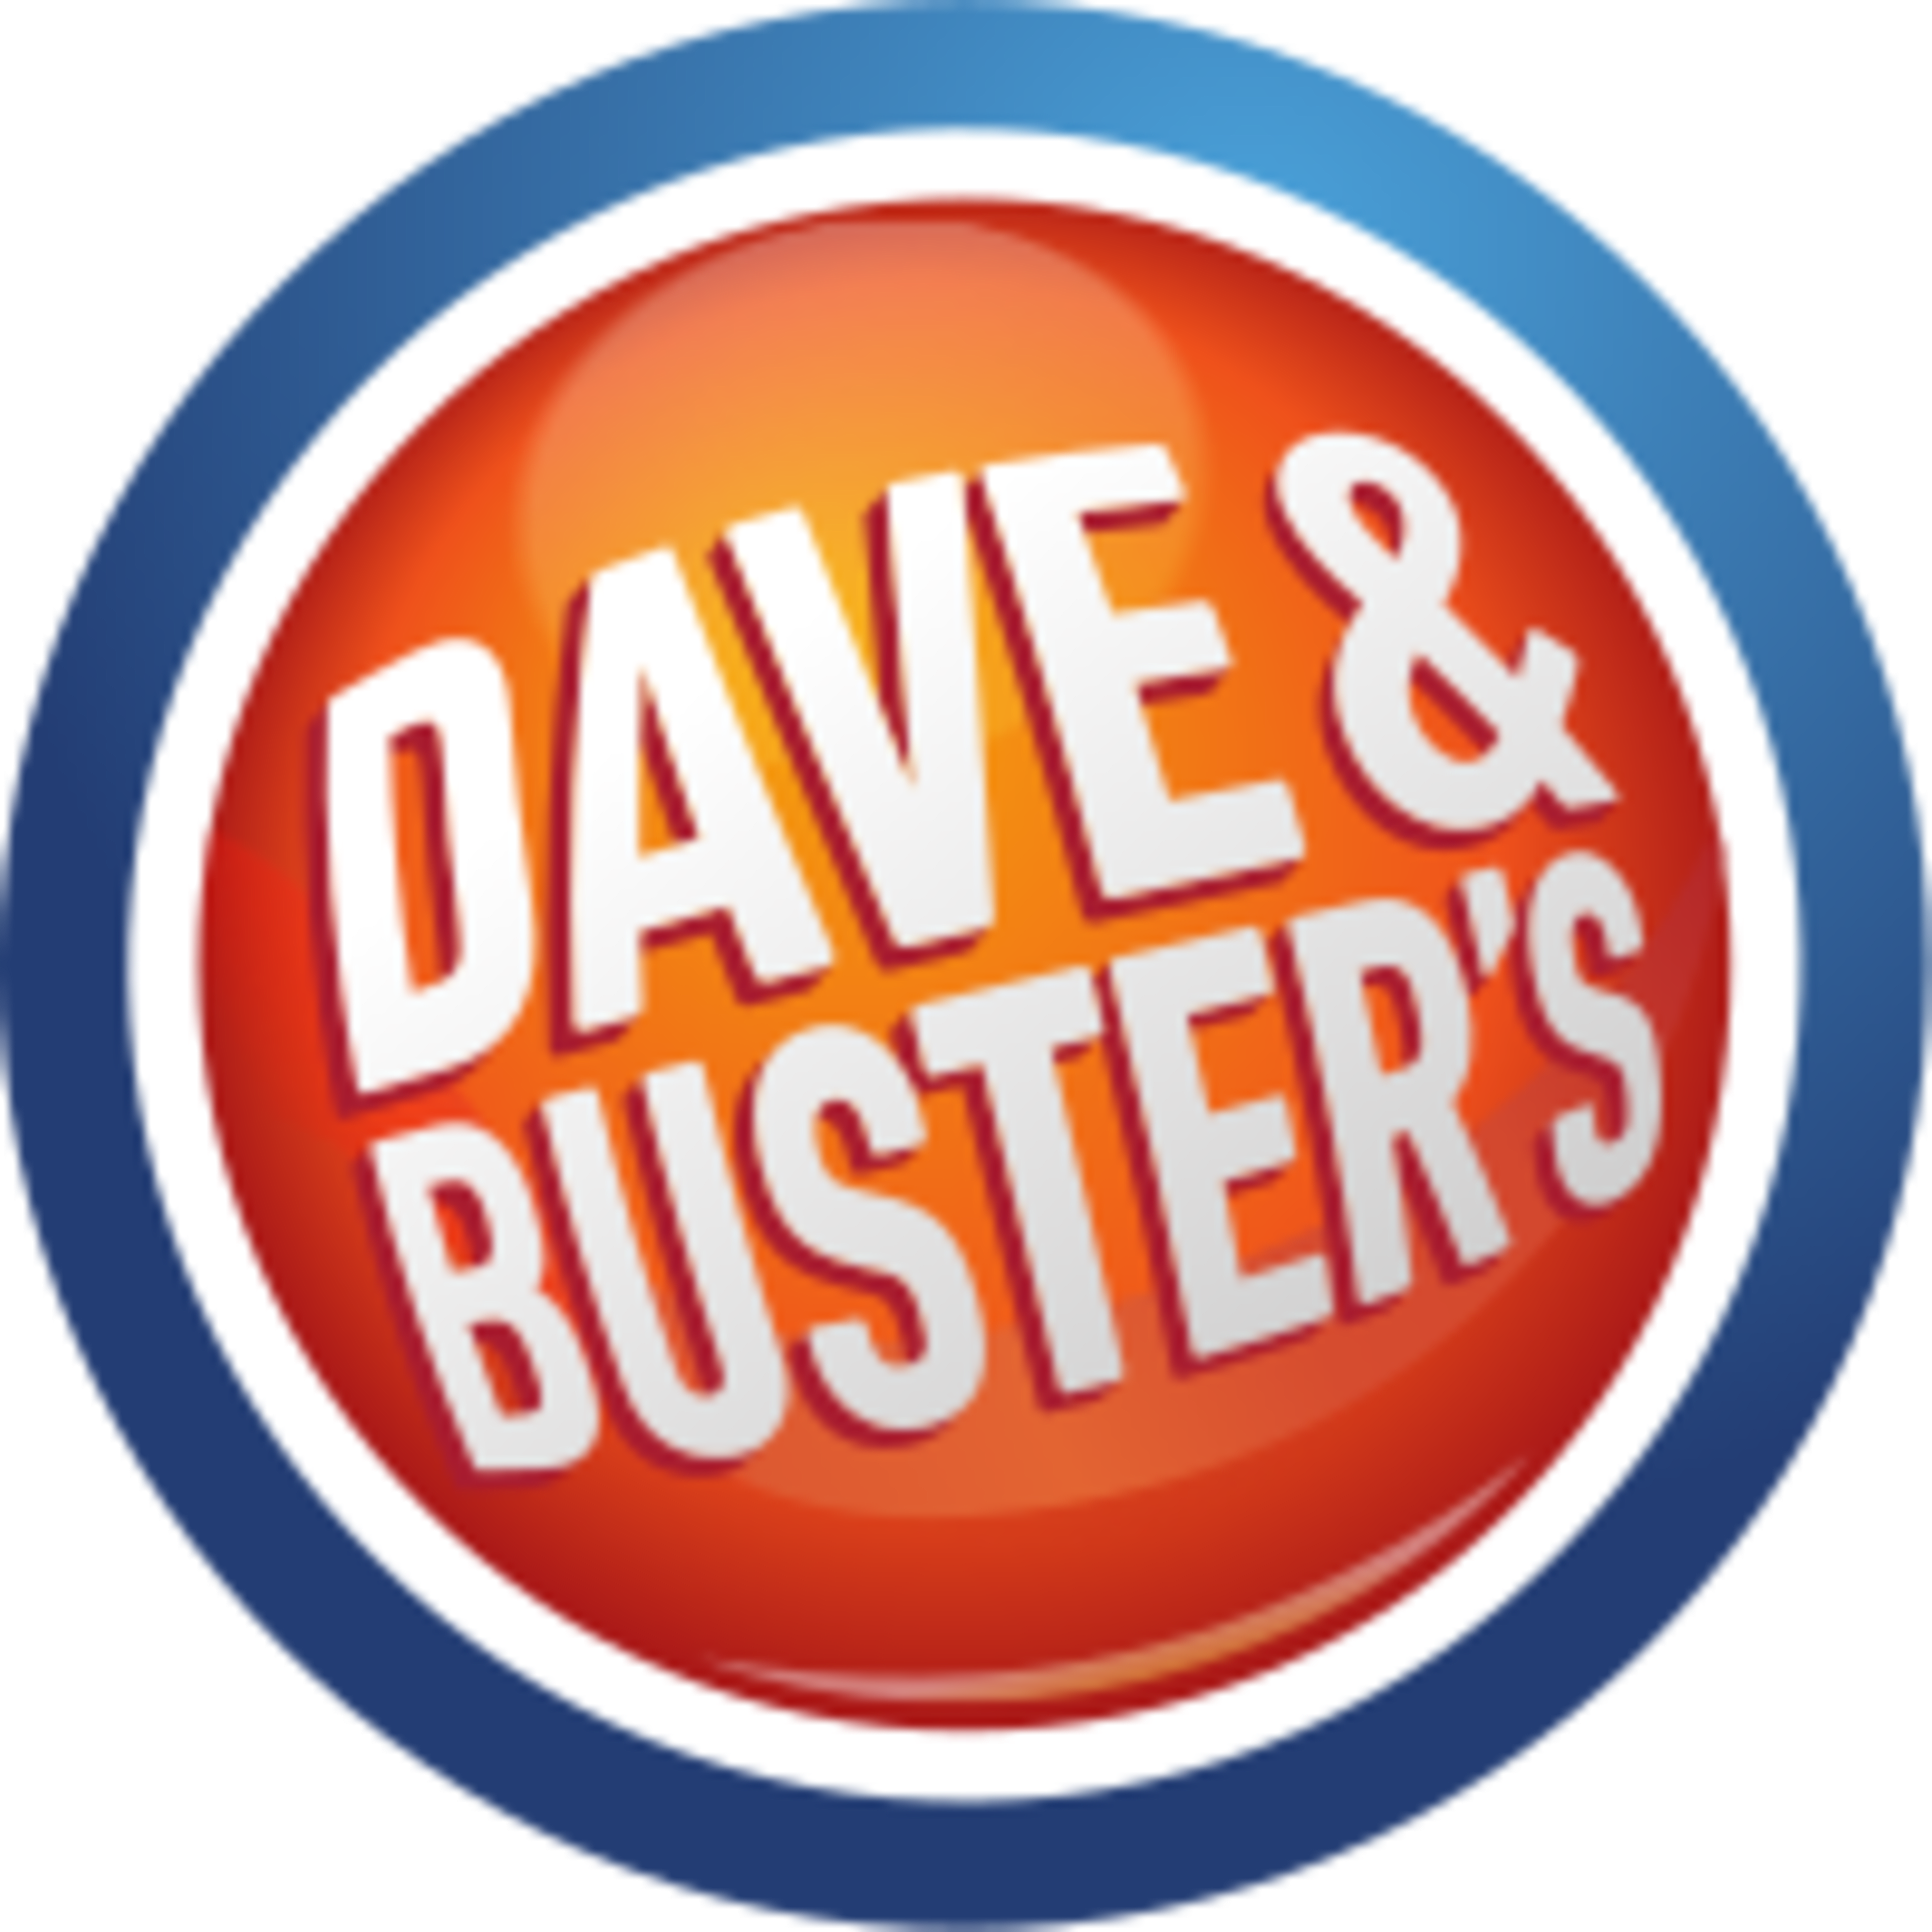 Dave and BustersCode